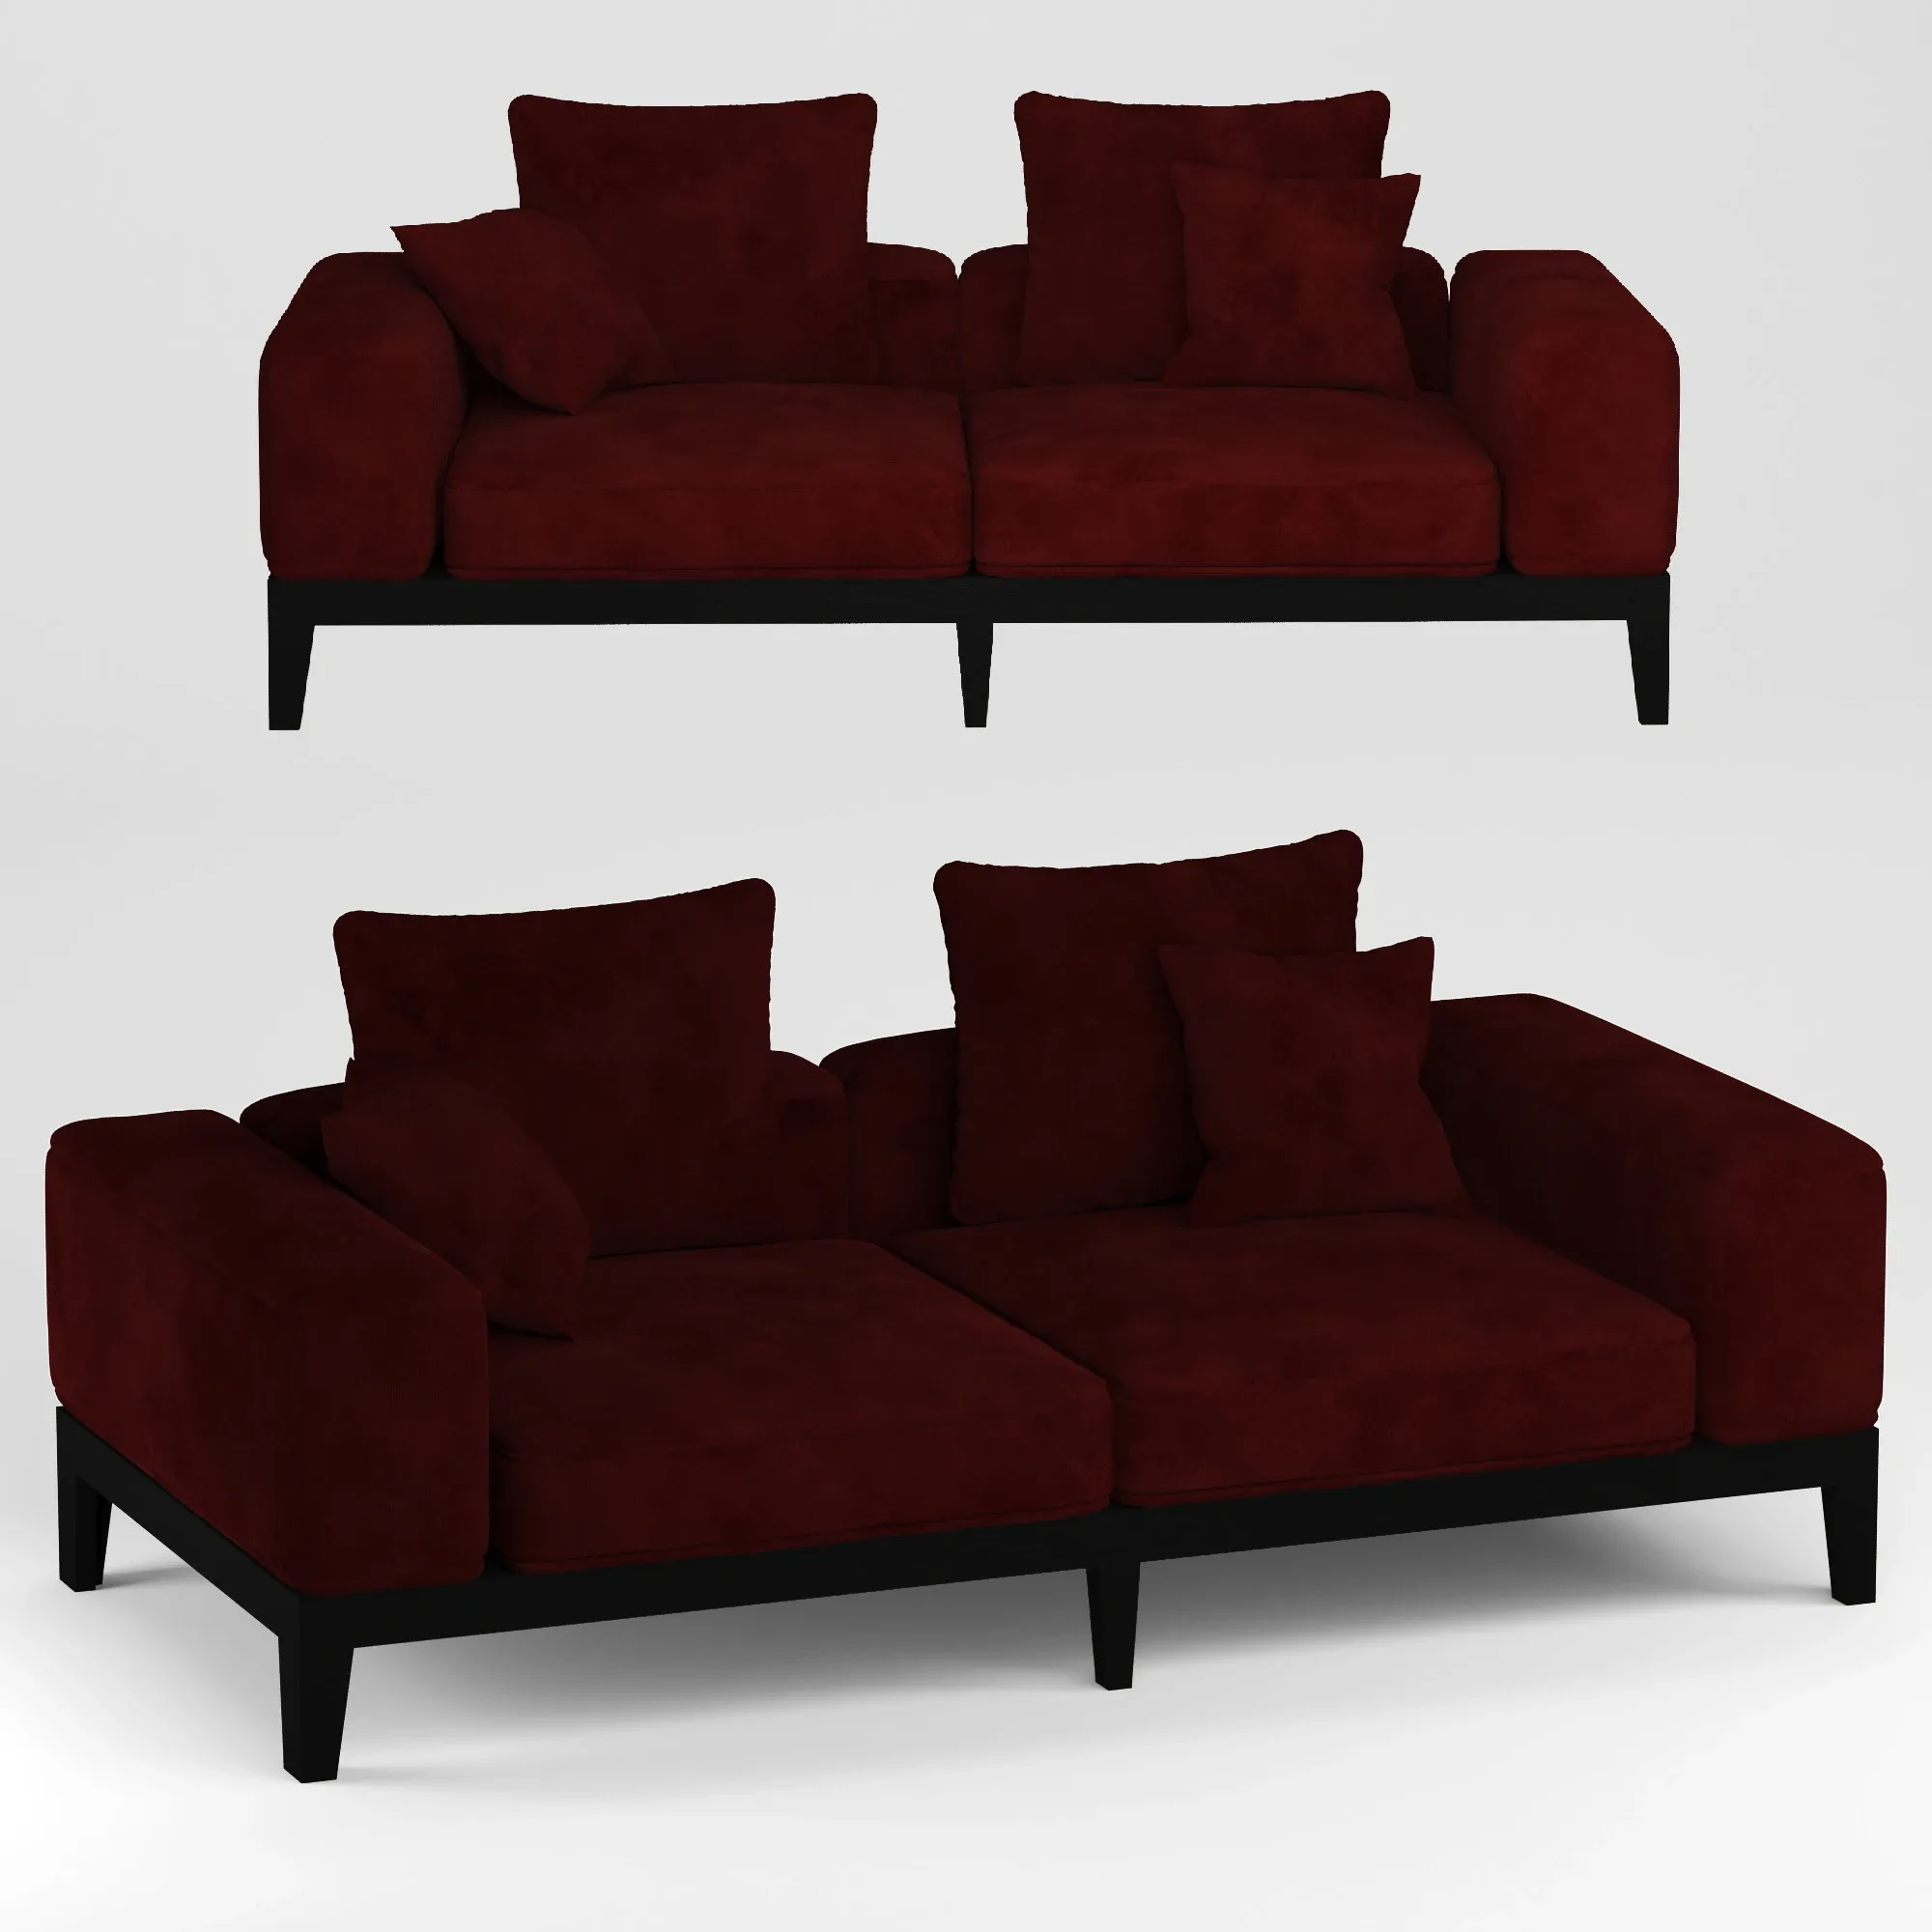 MOODIE TWO-SEAT SOFA